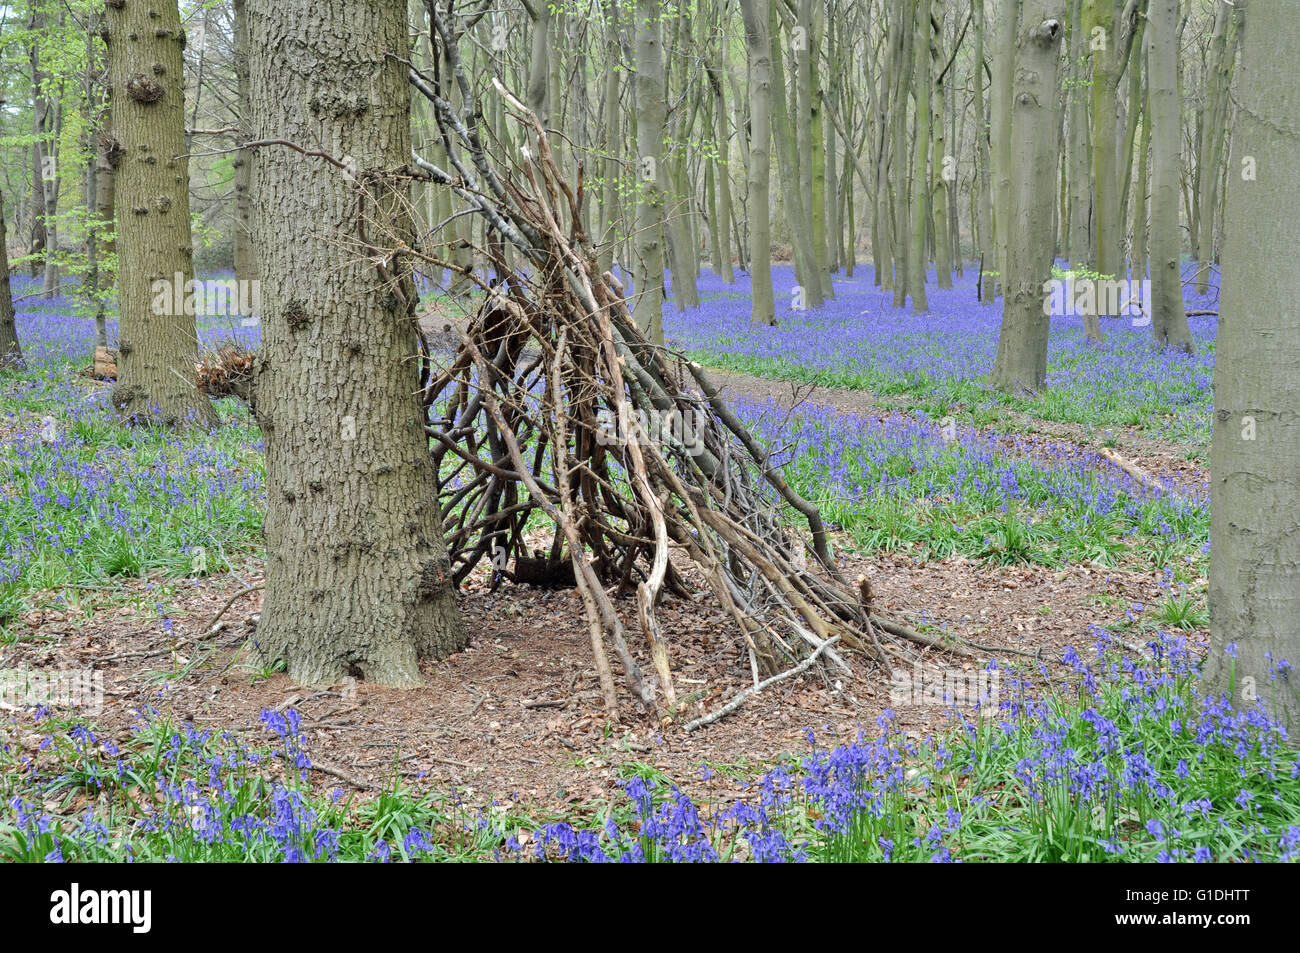 A den in a forest with bluebells. Stock Photo